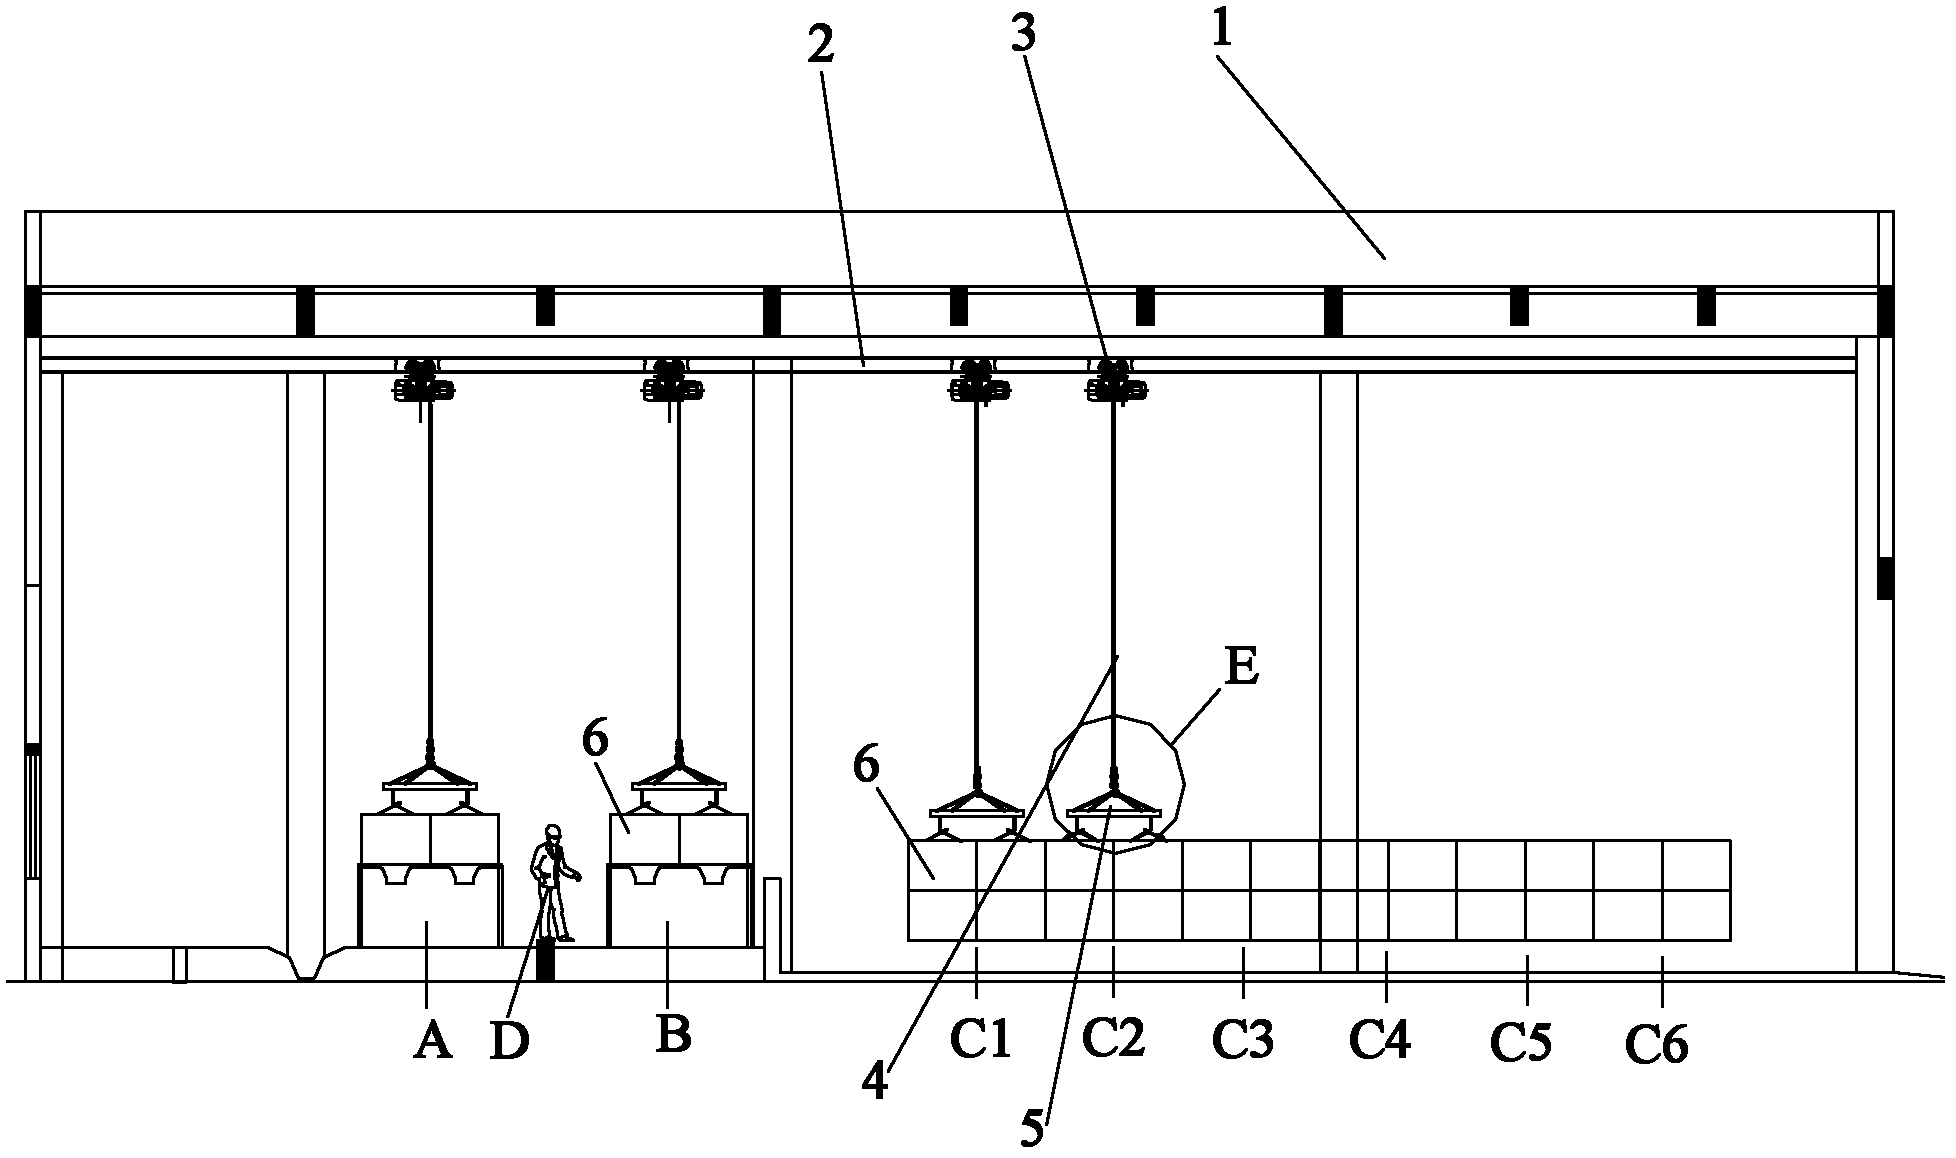 Automatic positioning discharge system